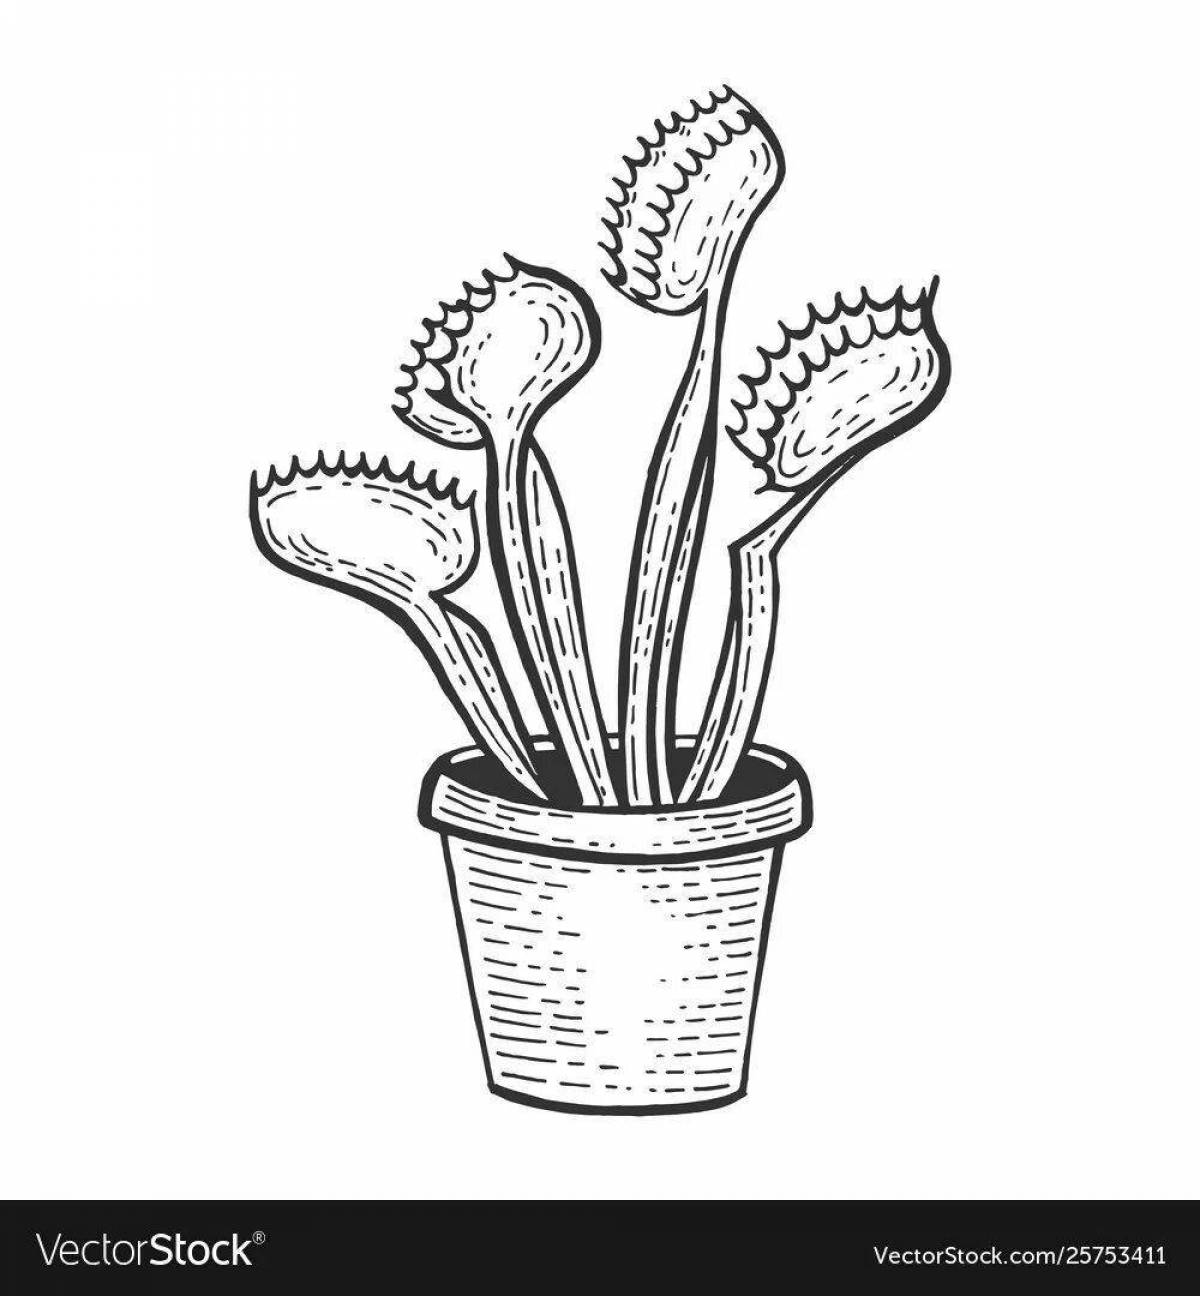 Awesome carnivorous plants coloring page